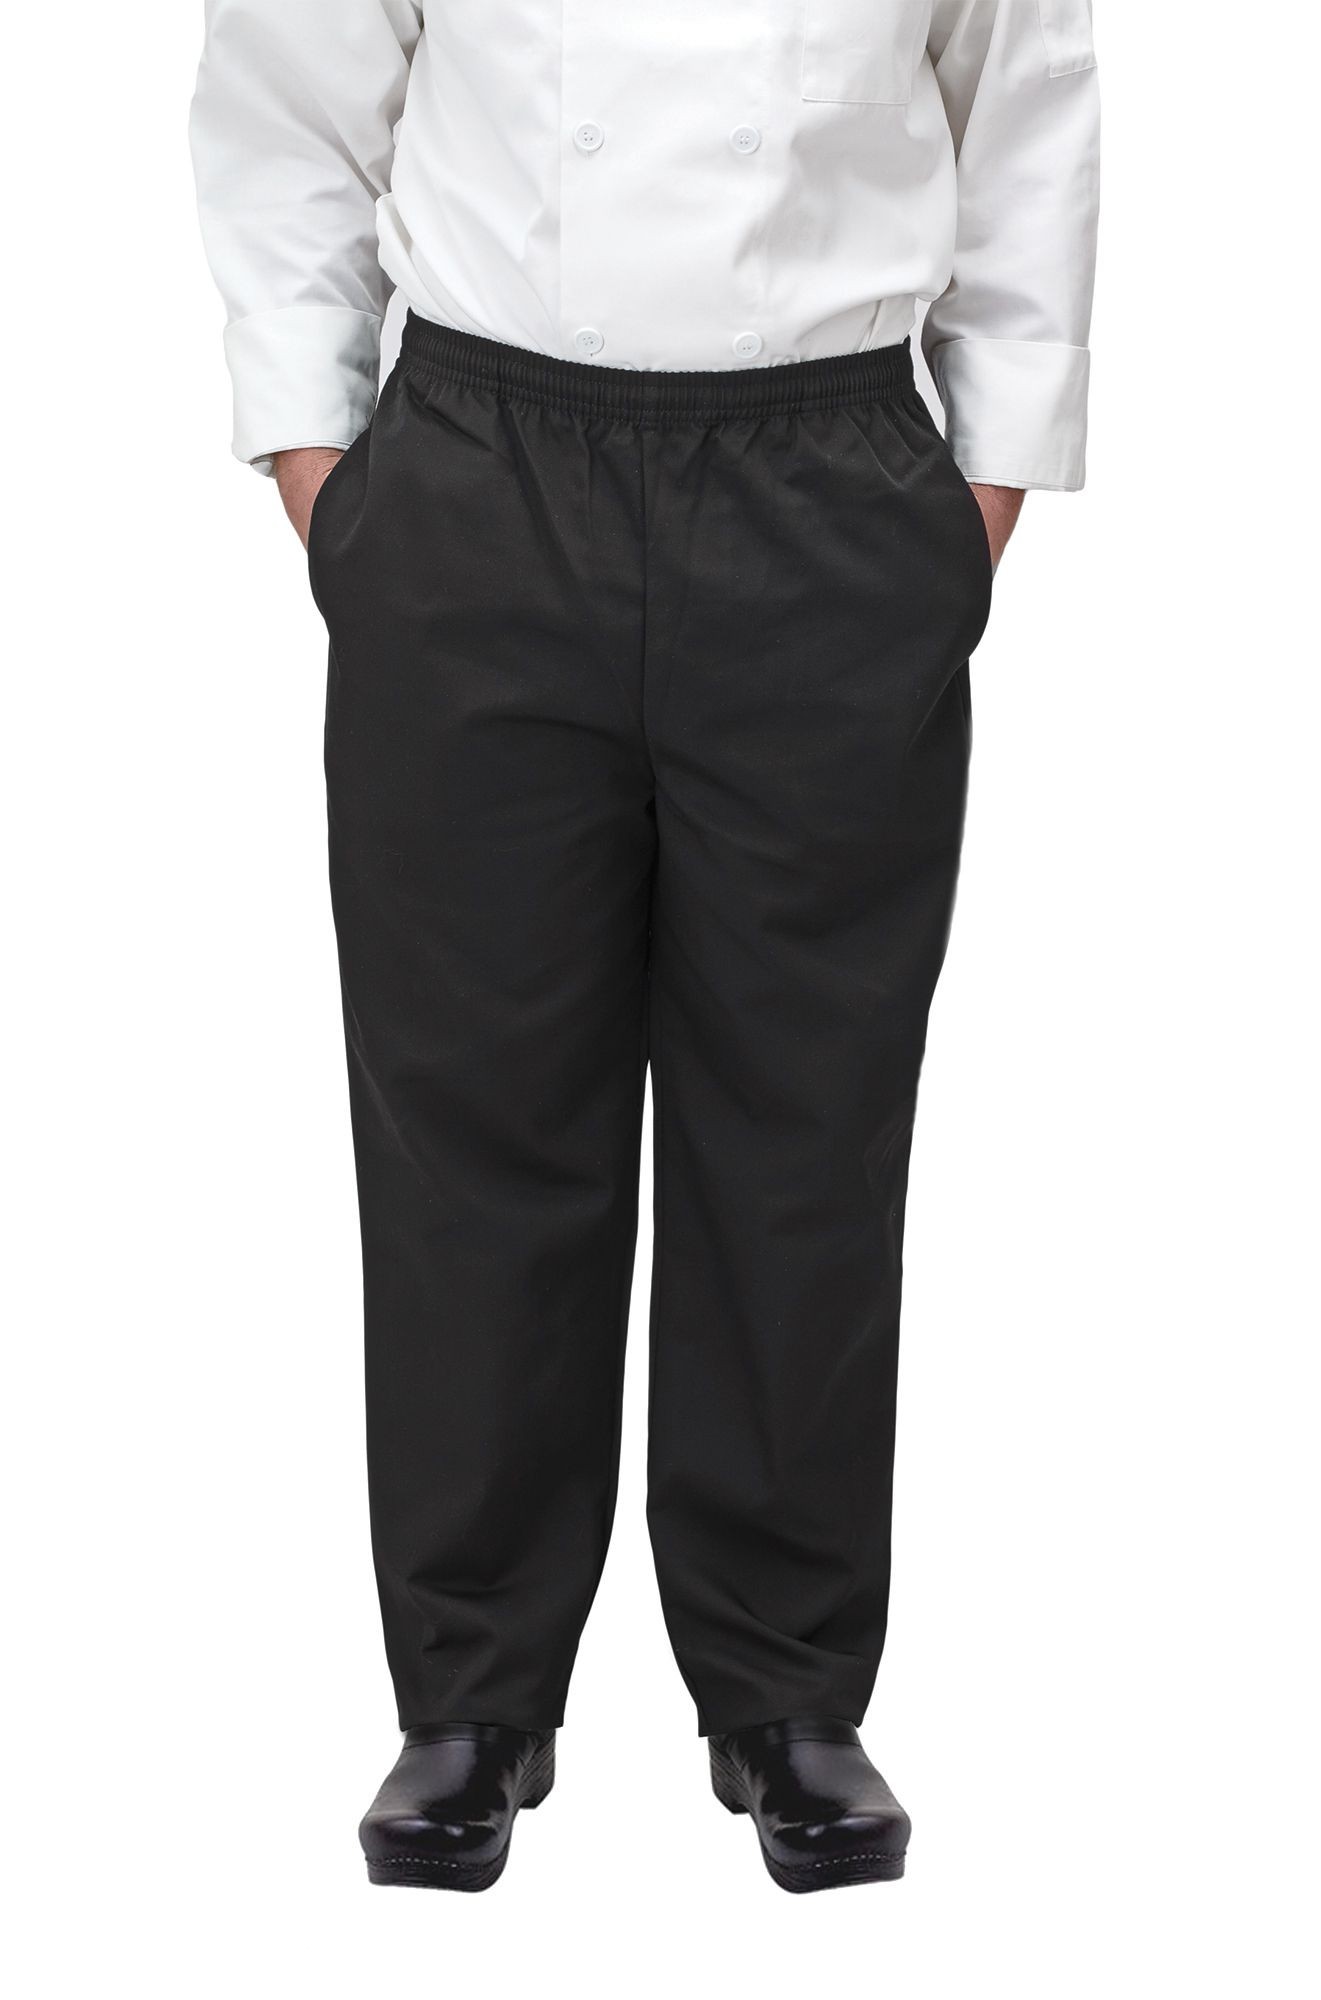 Winco UNF-2KL Black Poly-Cotton Blend Relaxed Fit Chef Pants, Large